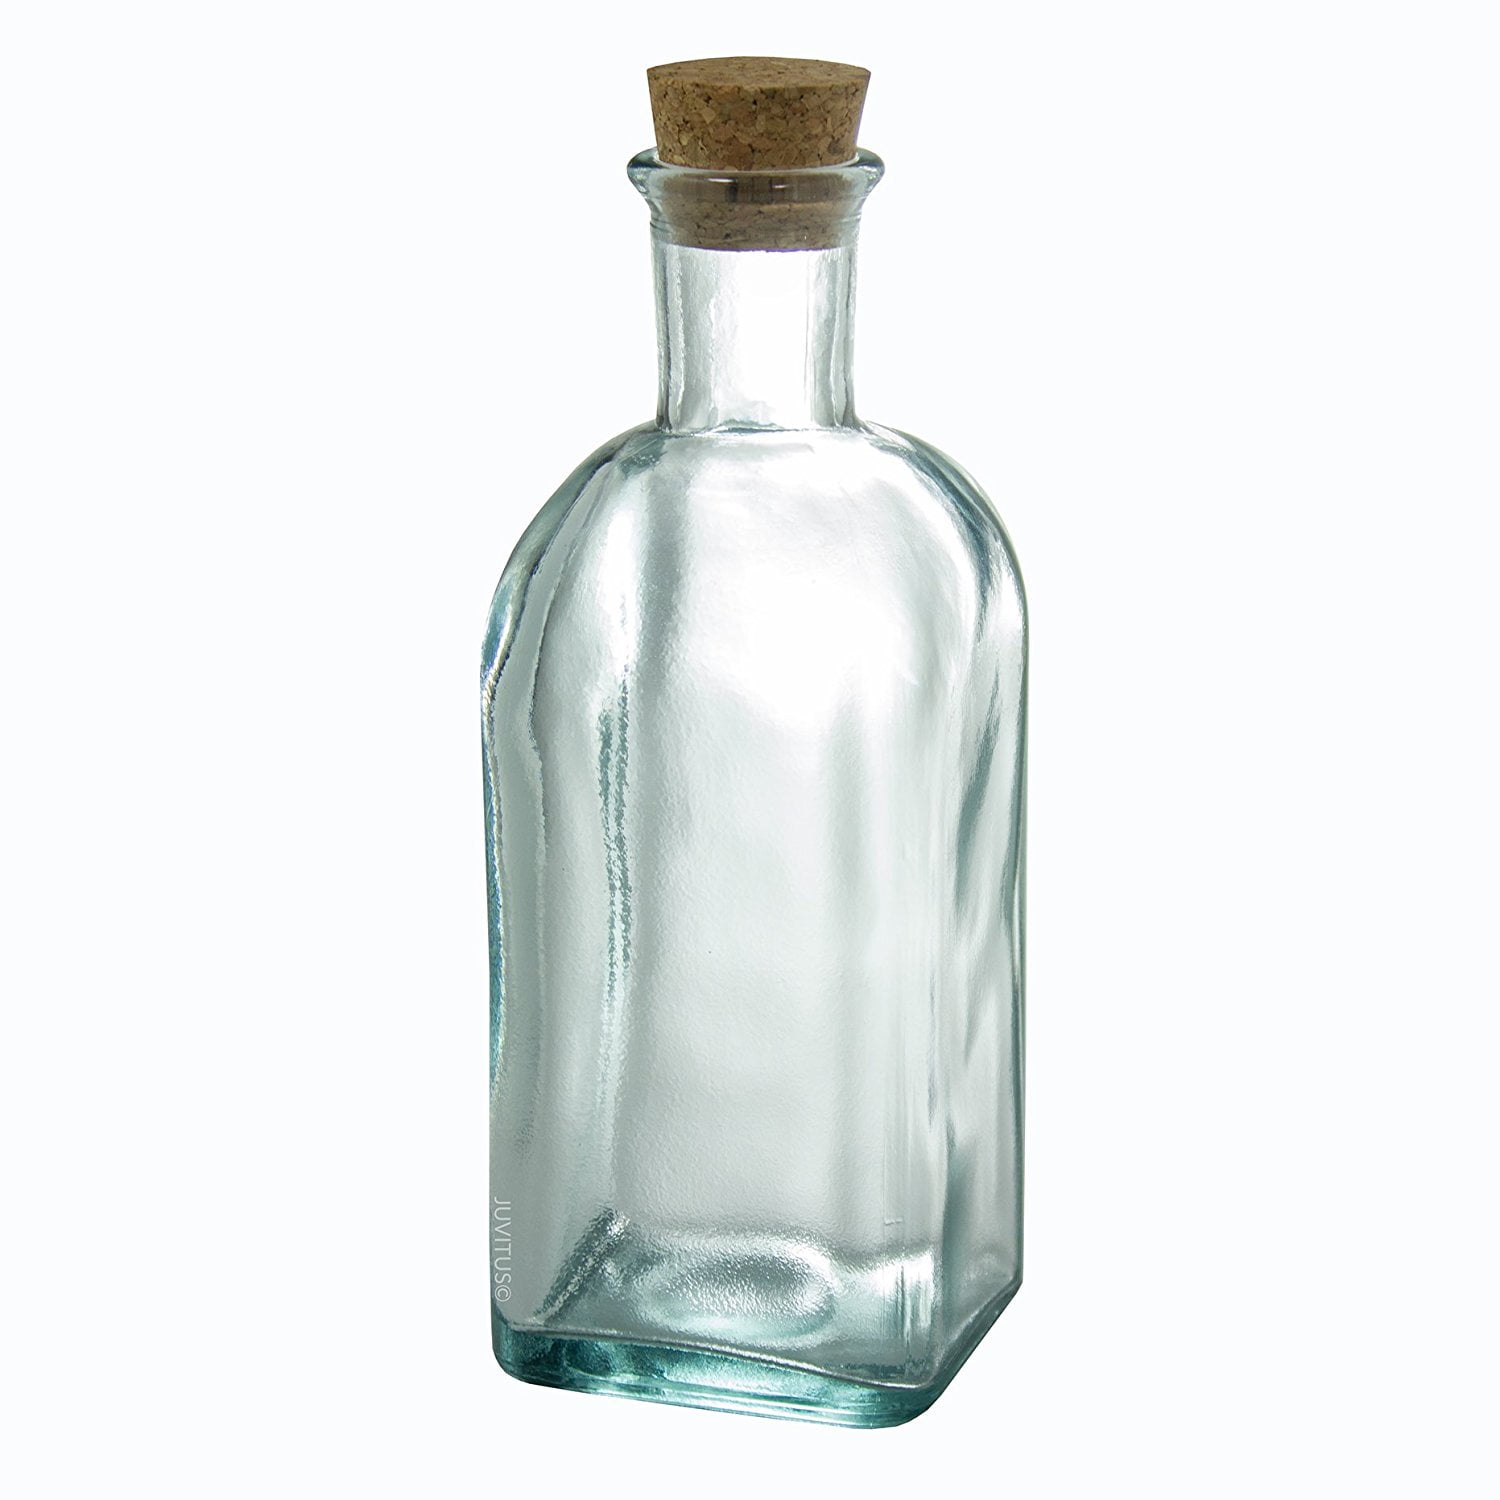 8 oz (250 ml) Clear Taberna Spanish Recycled Glass Bottle with Cork